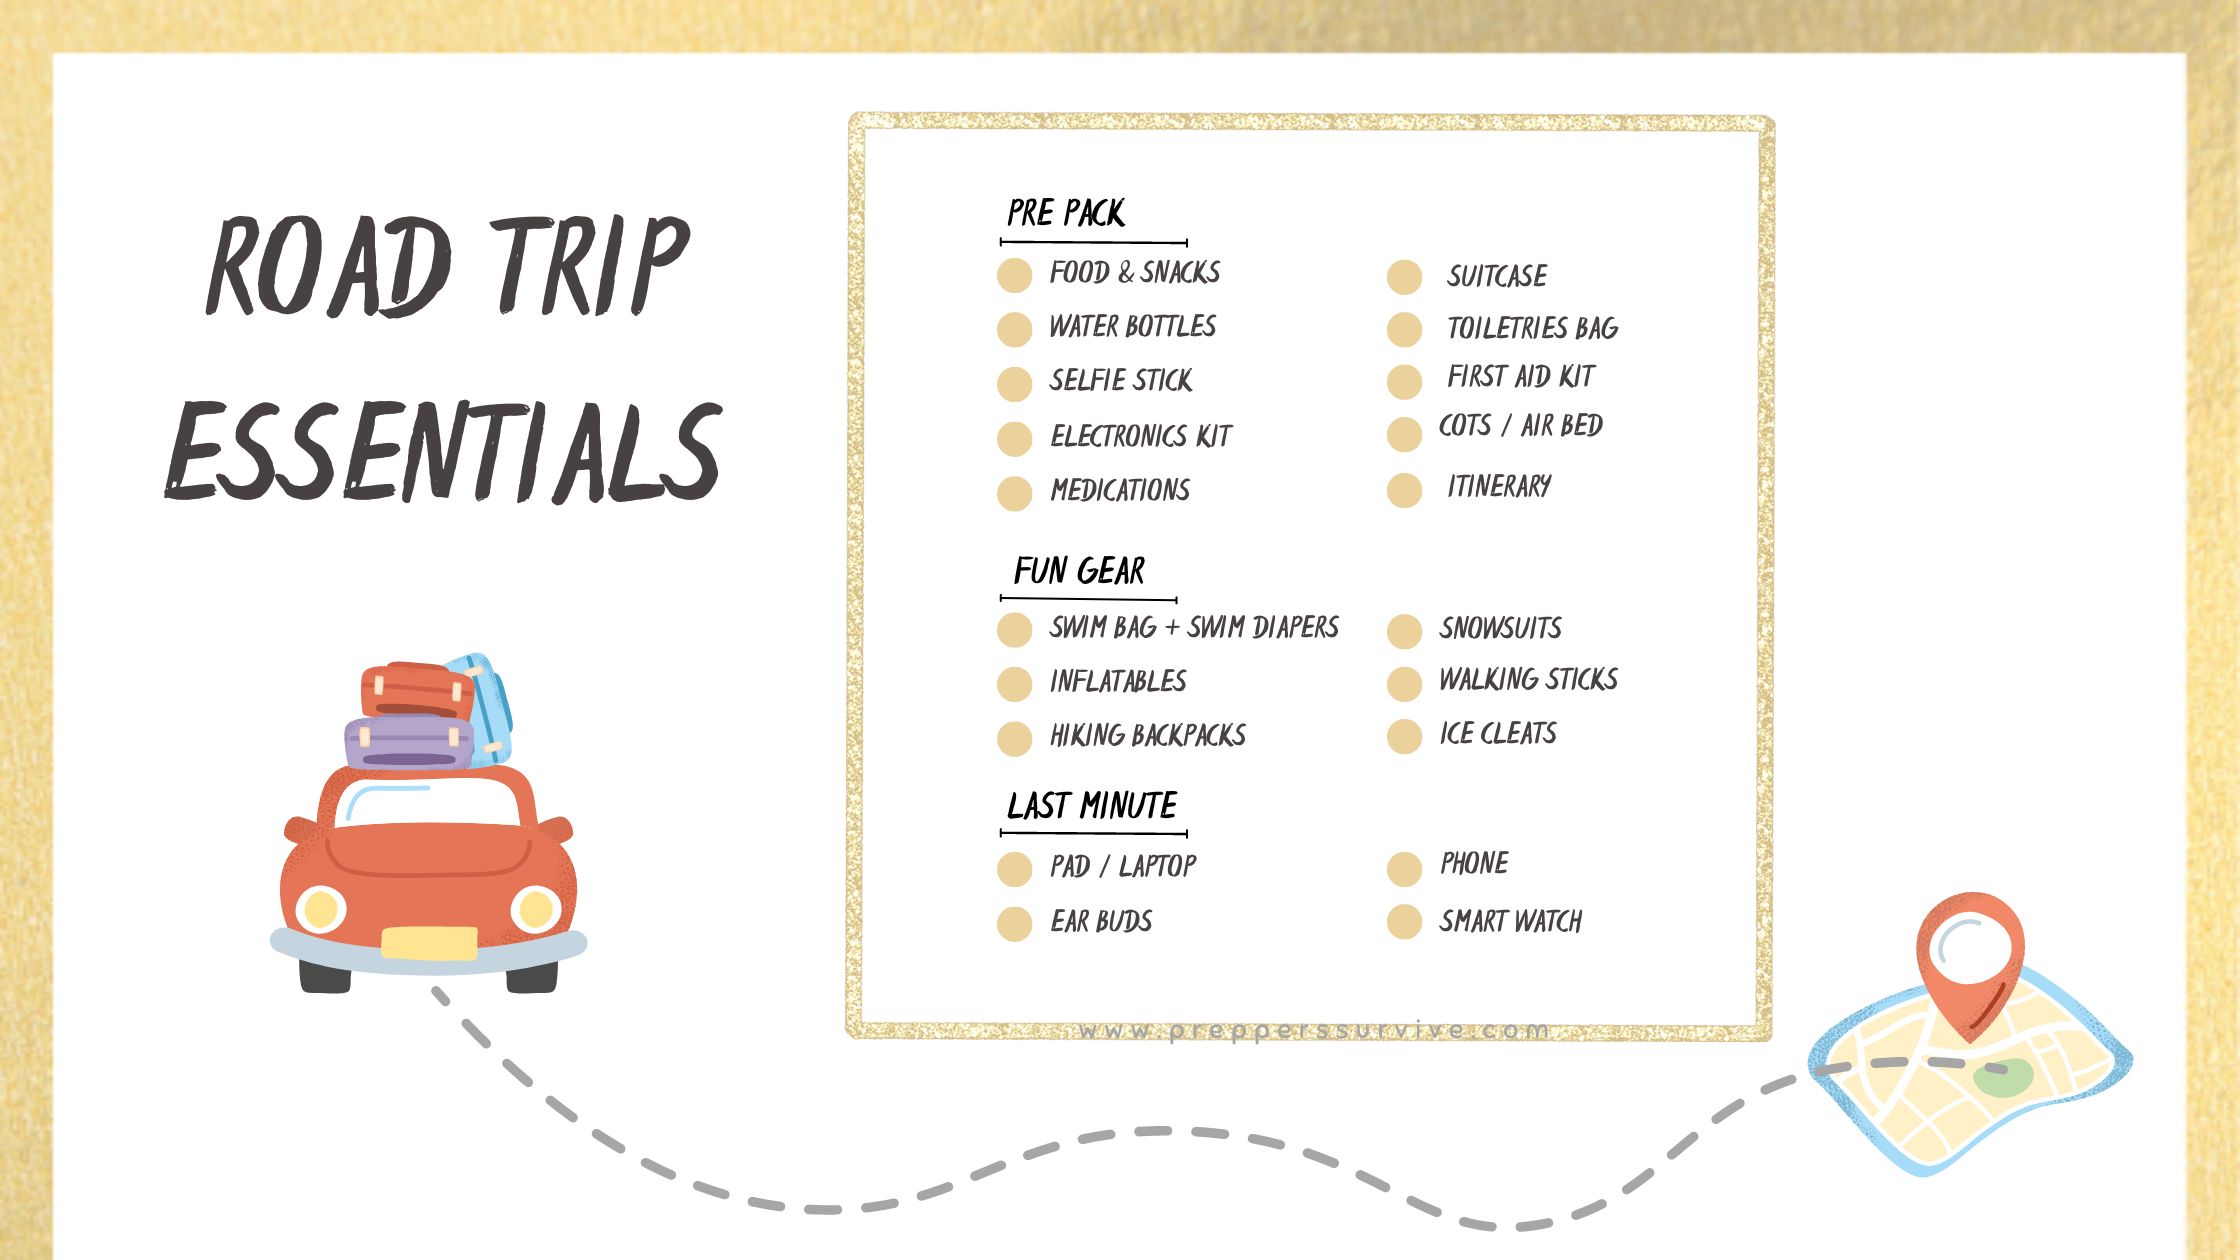 30 Road Trip Essentials for Adults and Kids 2021